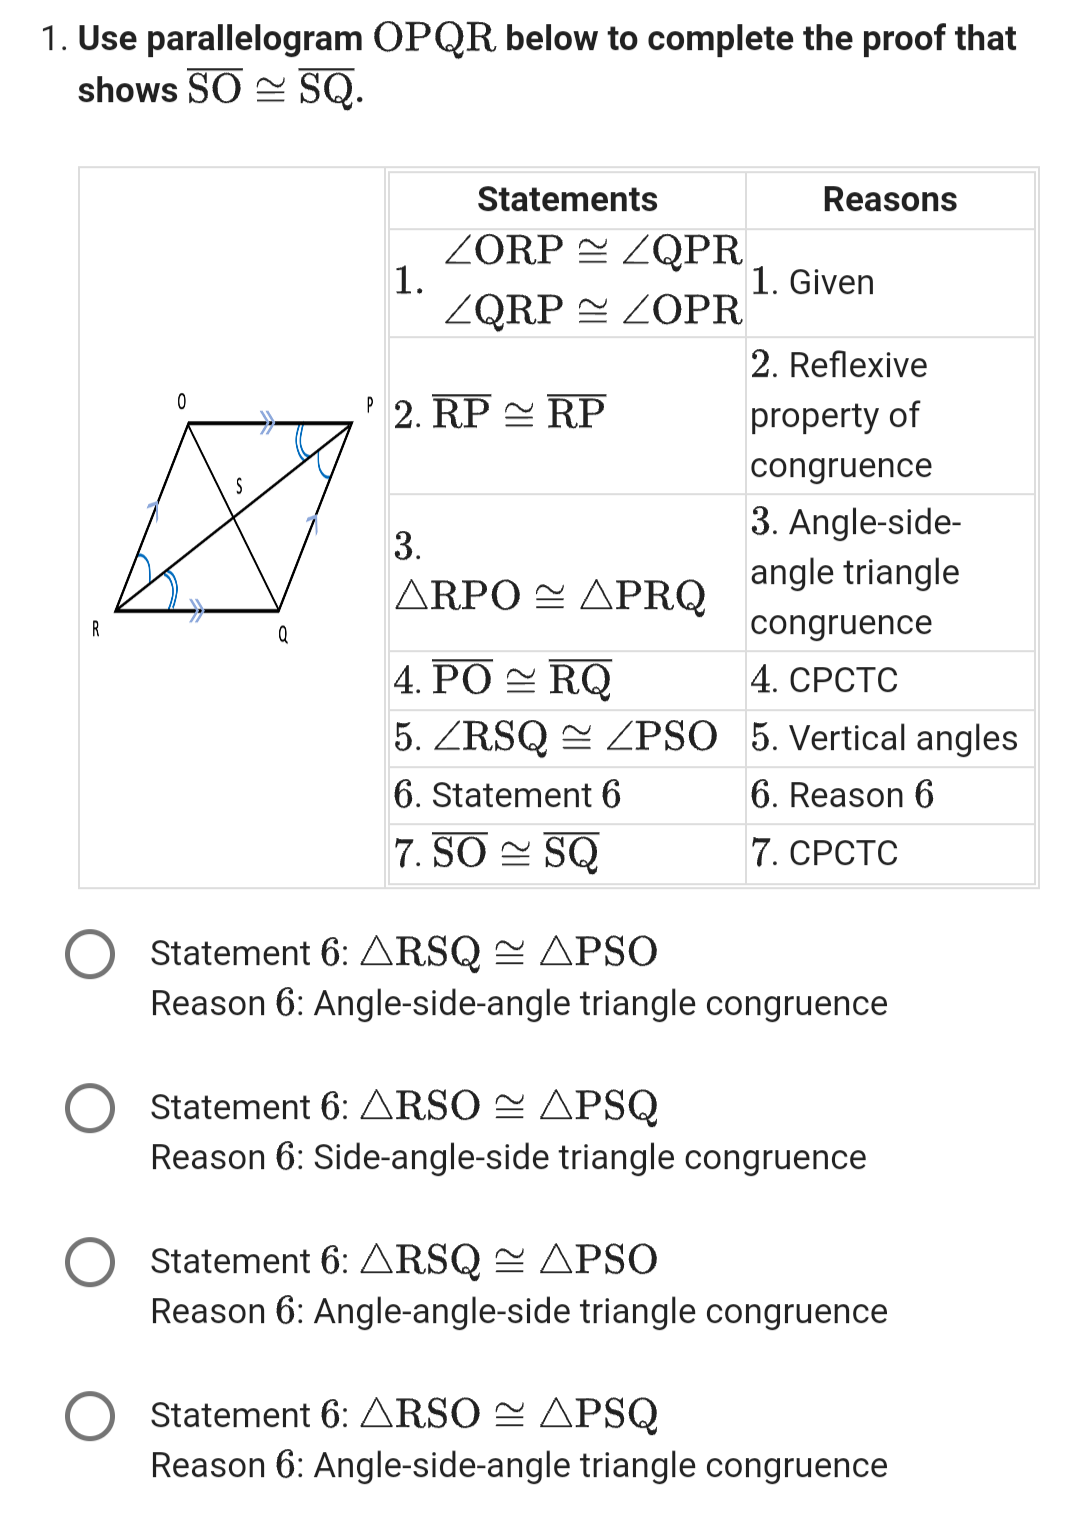 1. Use parallelogram OPQR. below to complete the proof that
shows SO SQ.
R
0
Q
1.
Statements
ZORPZQPR
ZQRP
P 2. RP RP
ZOPR
3.
ΔΩΡΟ = ΔΡRΟ
4. PORQ
5. ZRSQ/PSO
6. Statement 6
7. SO SQ
Reasons
1. Given
2. Reflexive
property of
congruence
3. Angle-side-
angle triangle
congruence
4. CPCTC
5. Vertical angles
6. Reason 6
7. CPCTC
Statement 6: ARSQ ≈ APSO
Reason 6: Angle-side-angle triangle congruence
Statement 6: ARSO ≈ APSQ
Reason 6: Side-angle-side triangle congruence
Statement 6: ARSQ ≈ APSO
Reason 6: Angle-angle-side triangle congruence
Statement 6: ARSO APSQ
Reason 6: Angle-side-angle triangle congruence